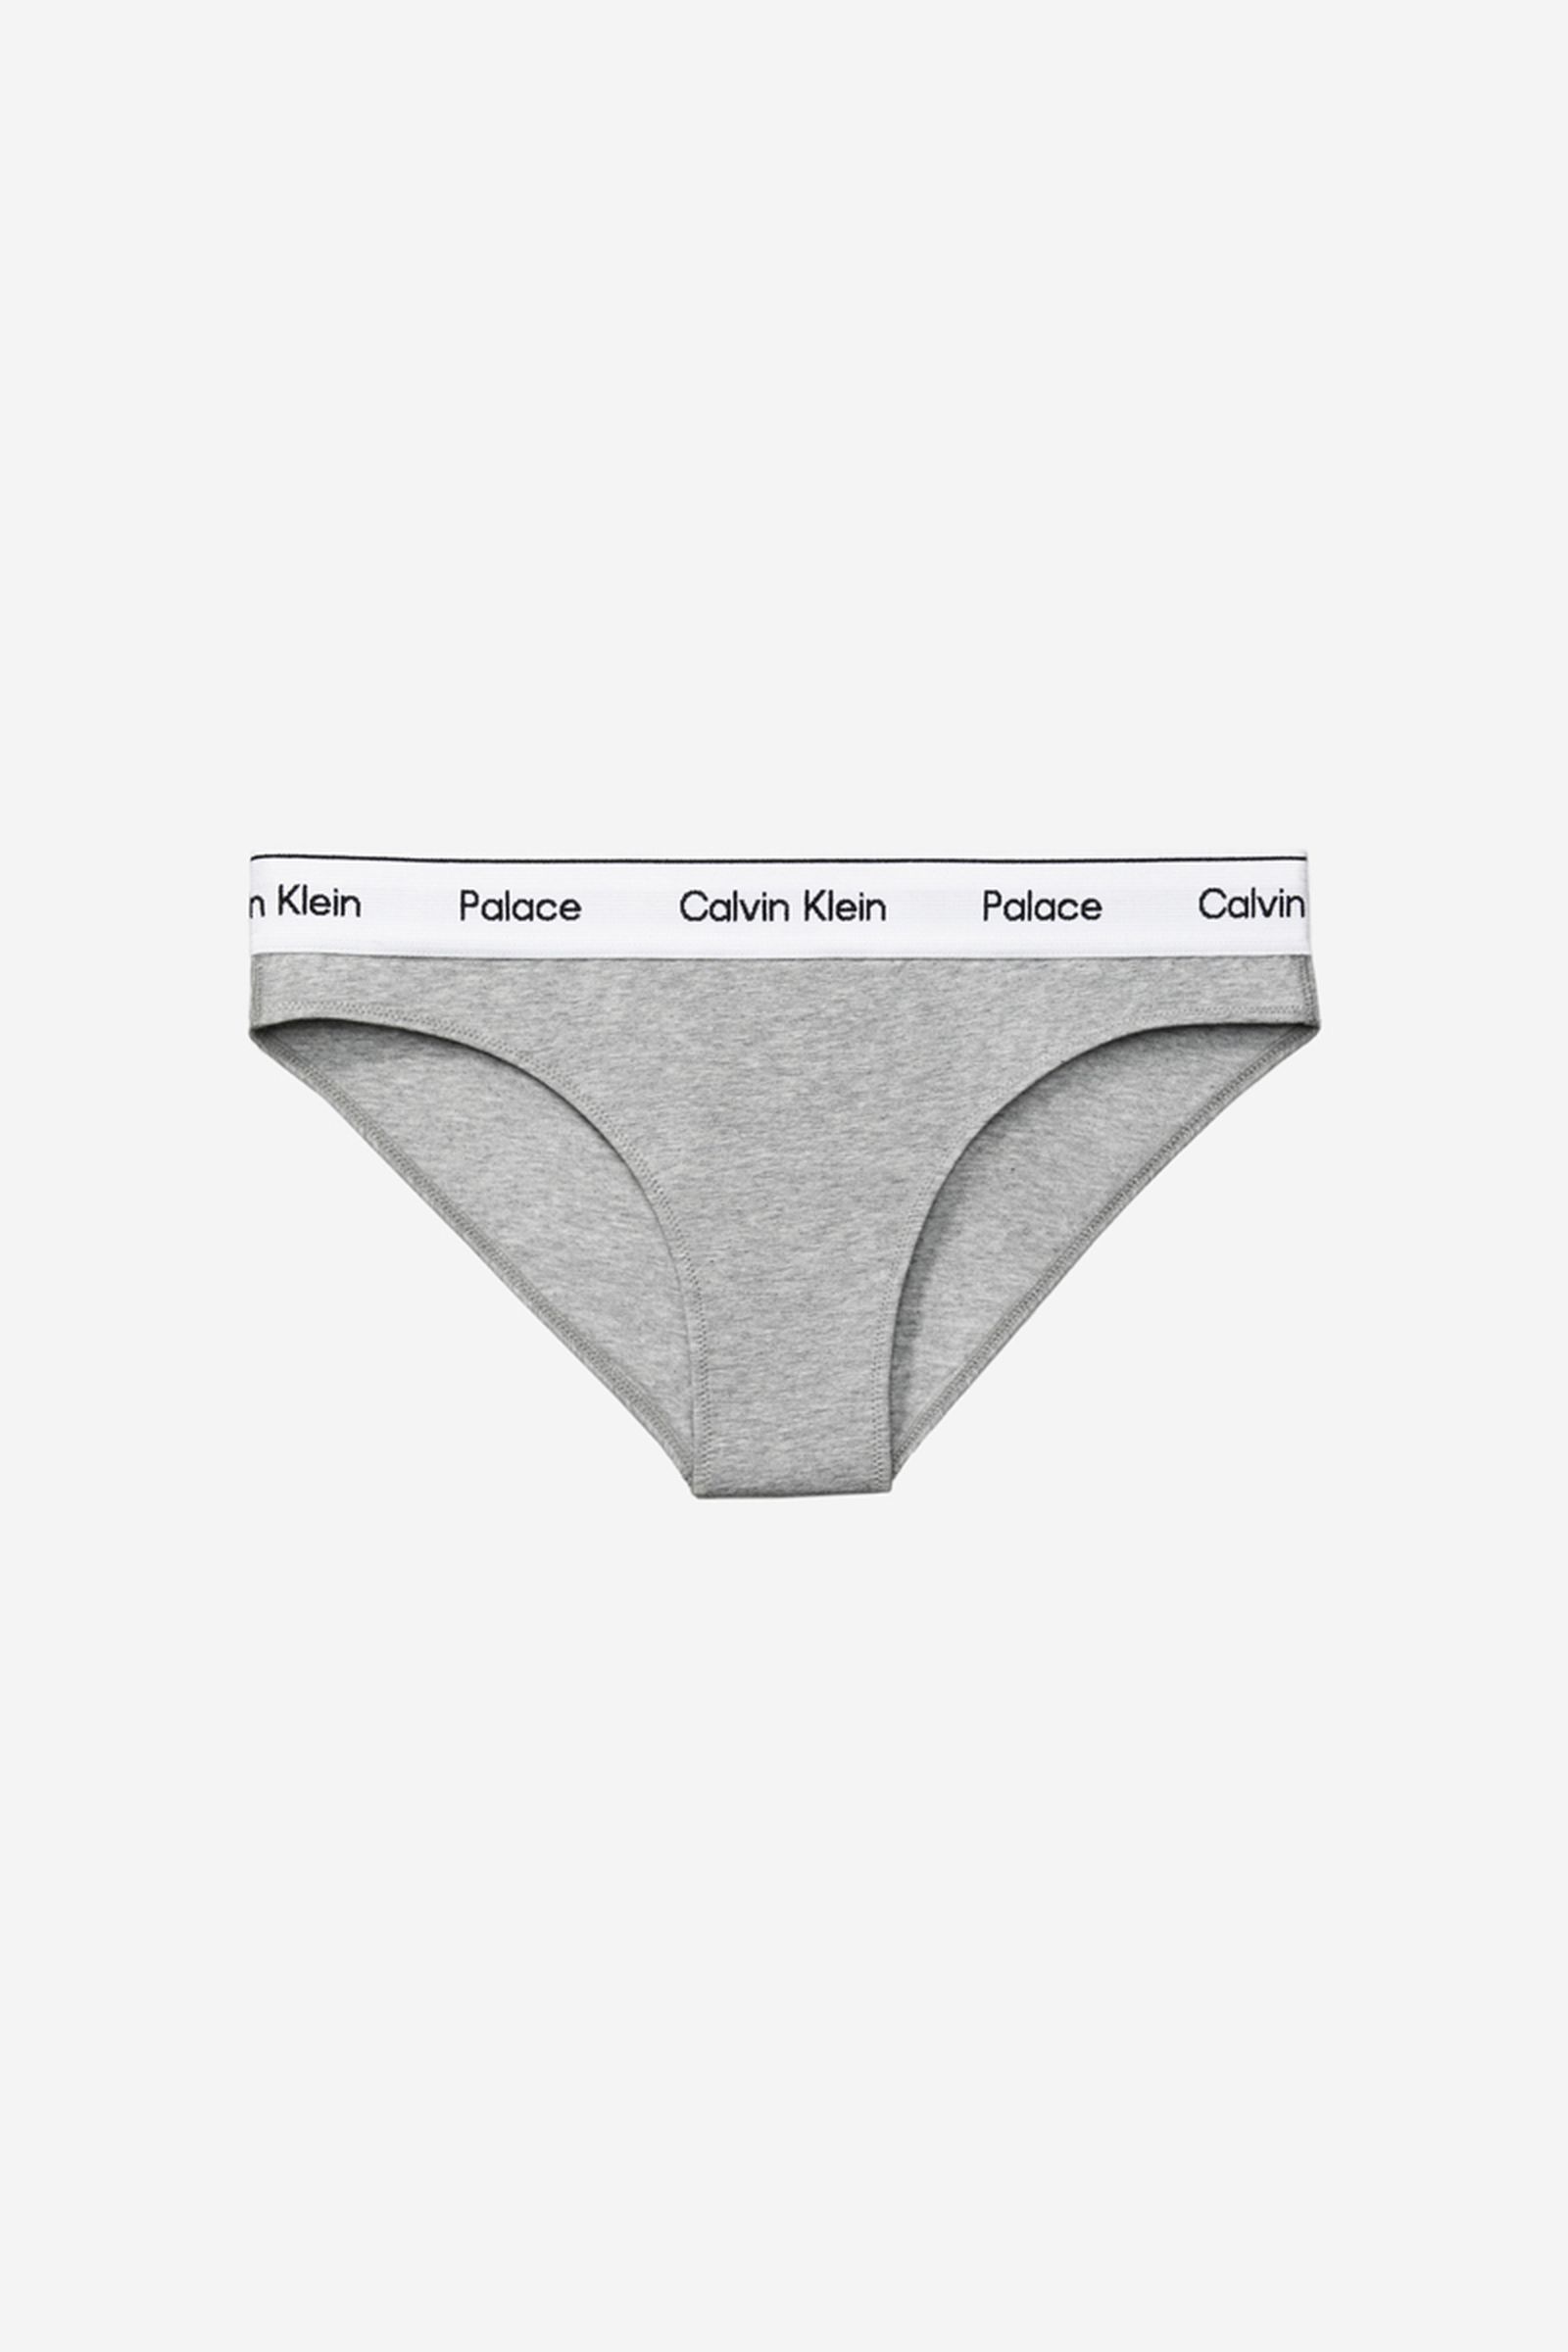 palace-calvin-klein-collab-collection-price-underwear-release-date (13)